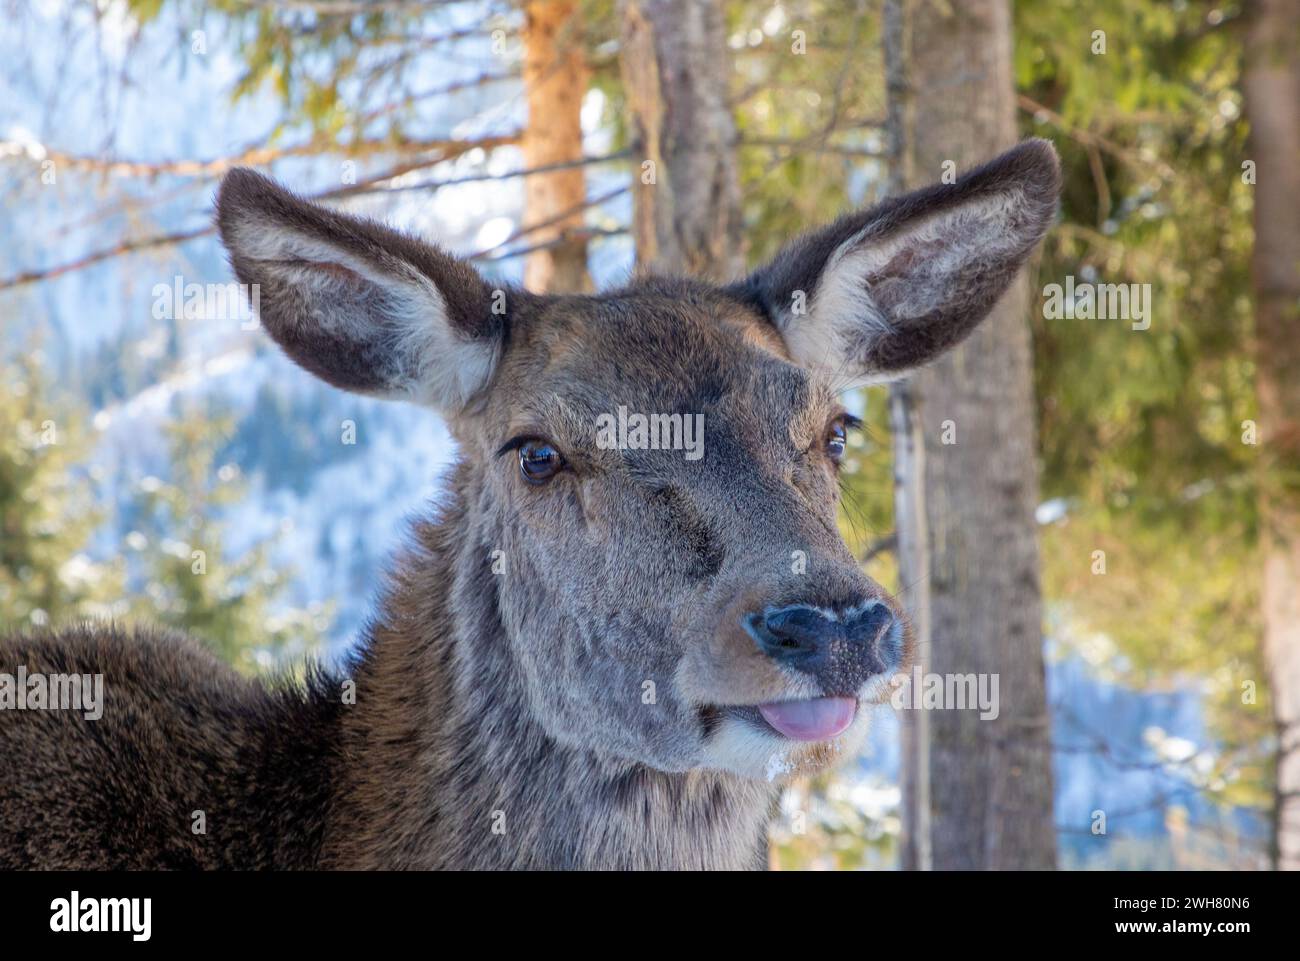 Close-up of a deer's head in snowy scenery Stock Photo